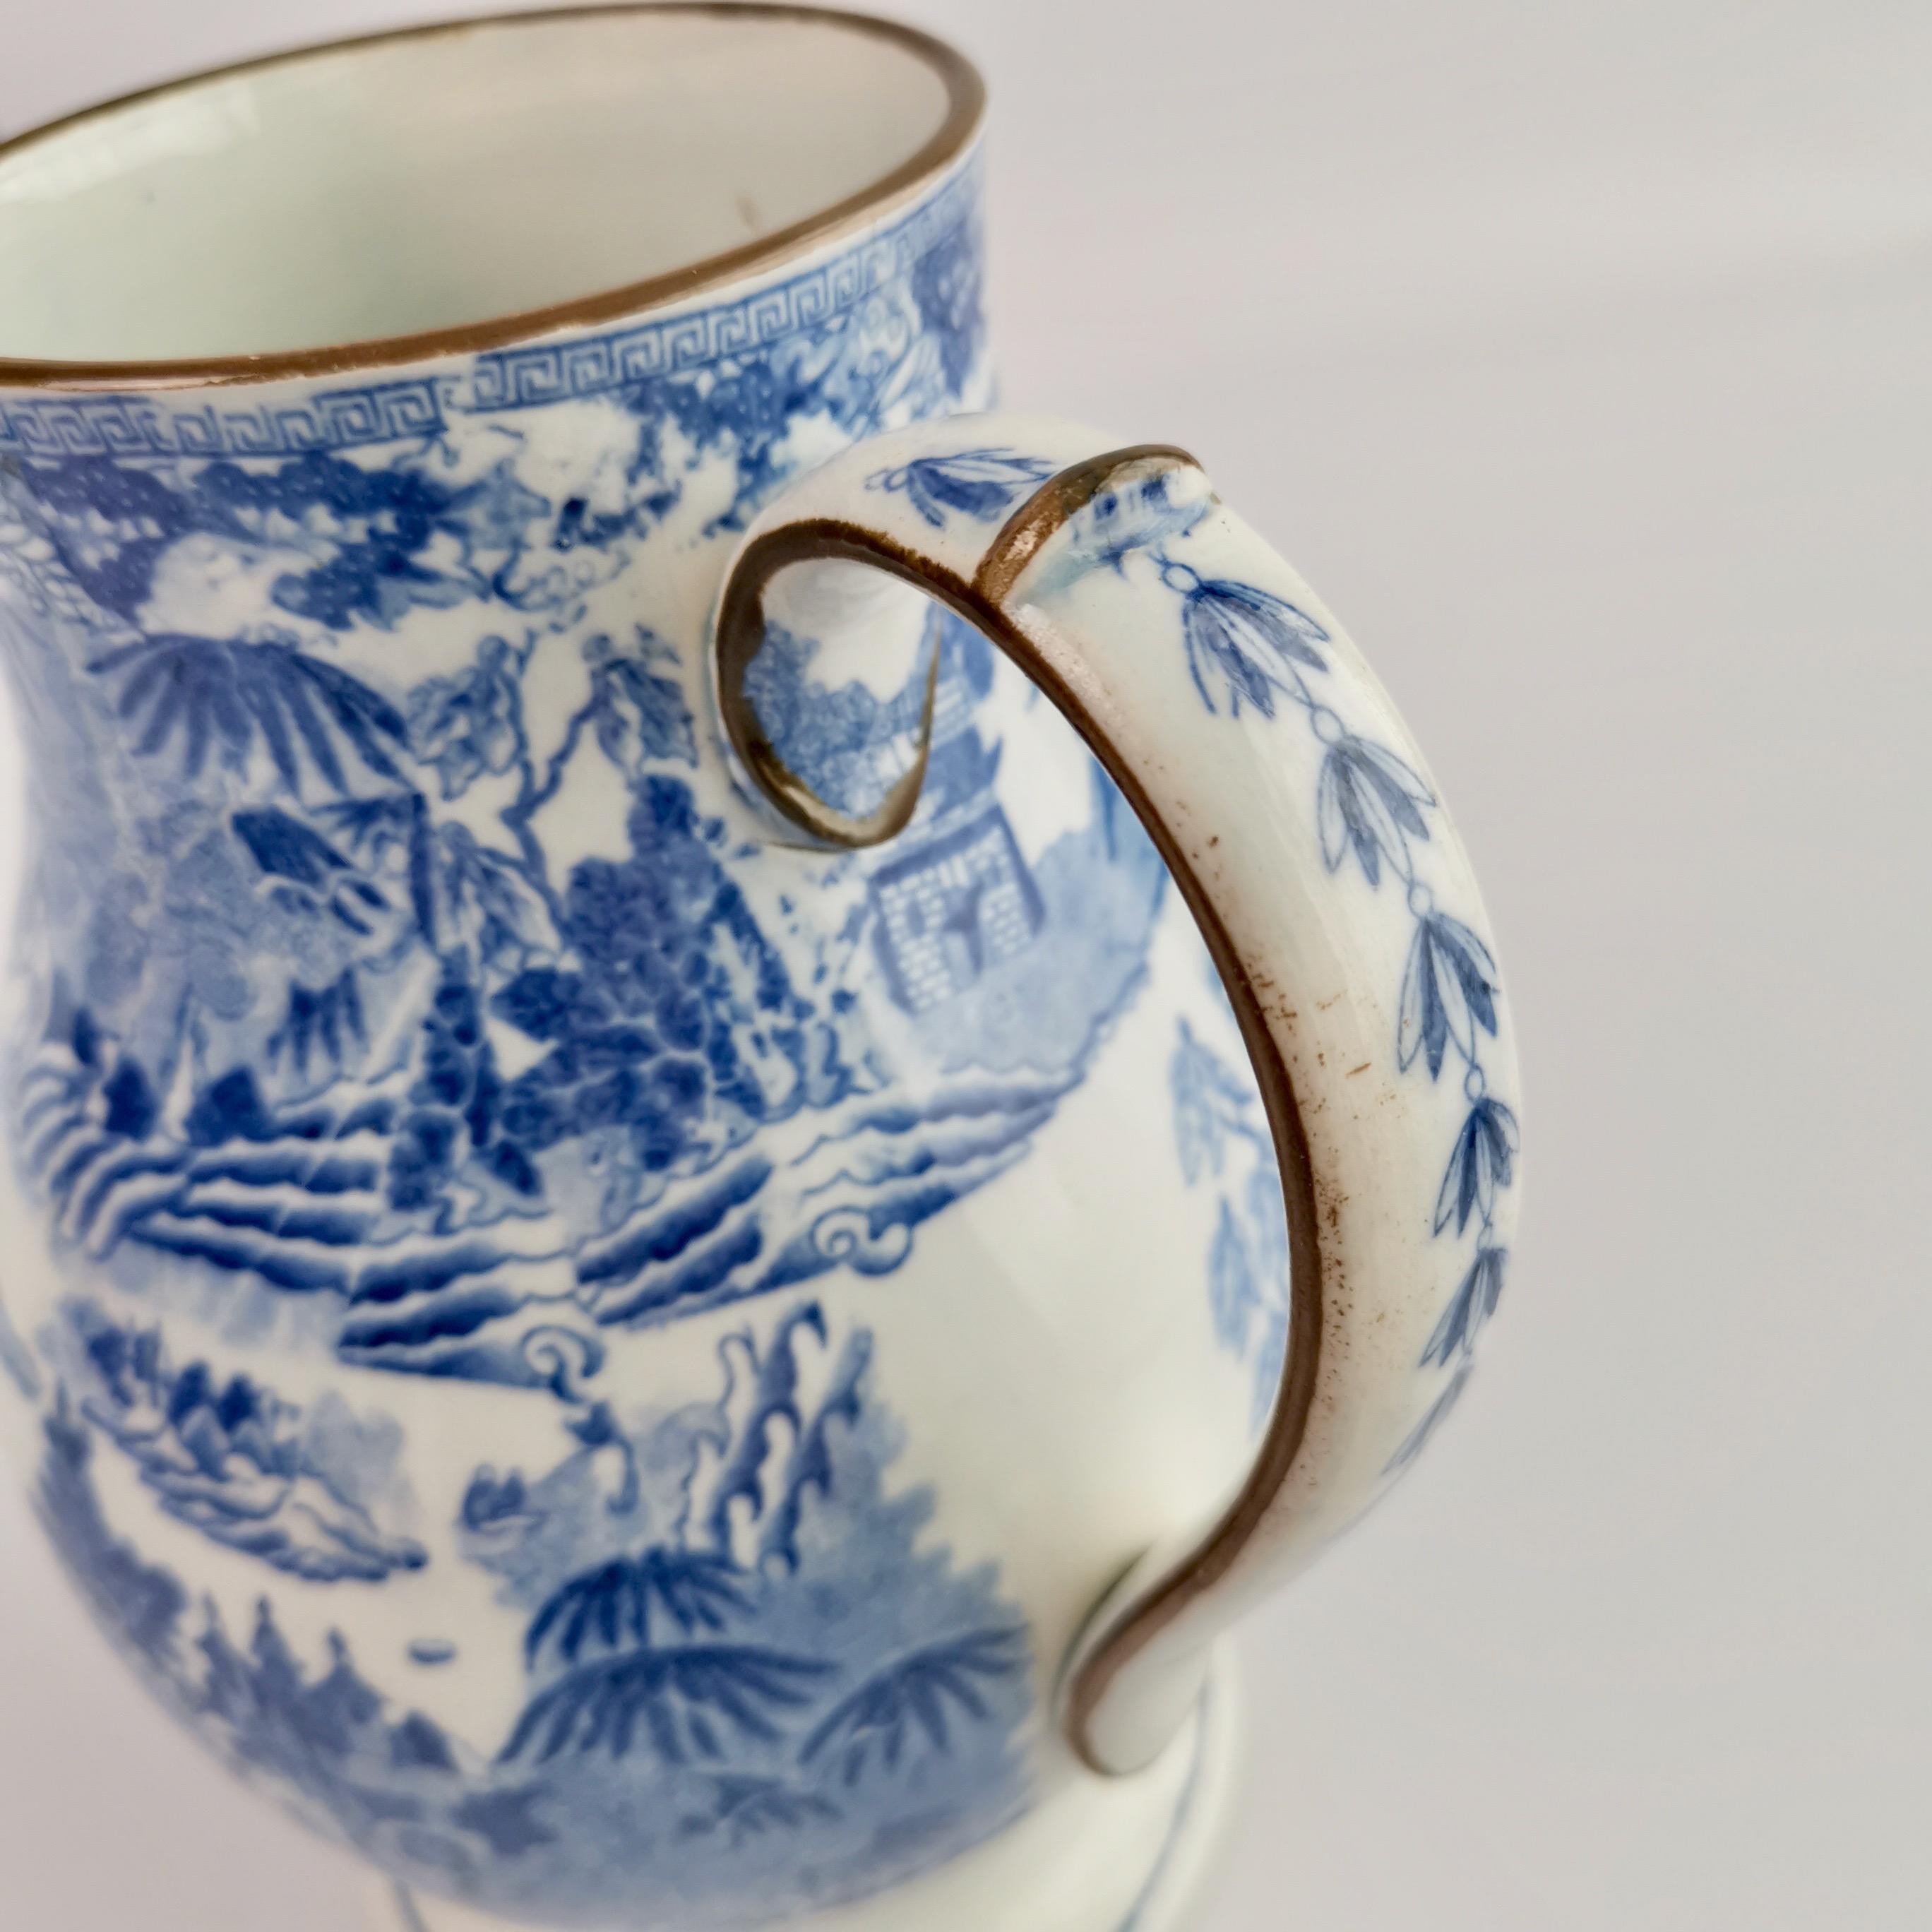 Rathbone Pearlware Coffee Pot, Pagoda Pattern Blue and White, ca 1815 4